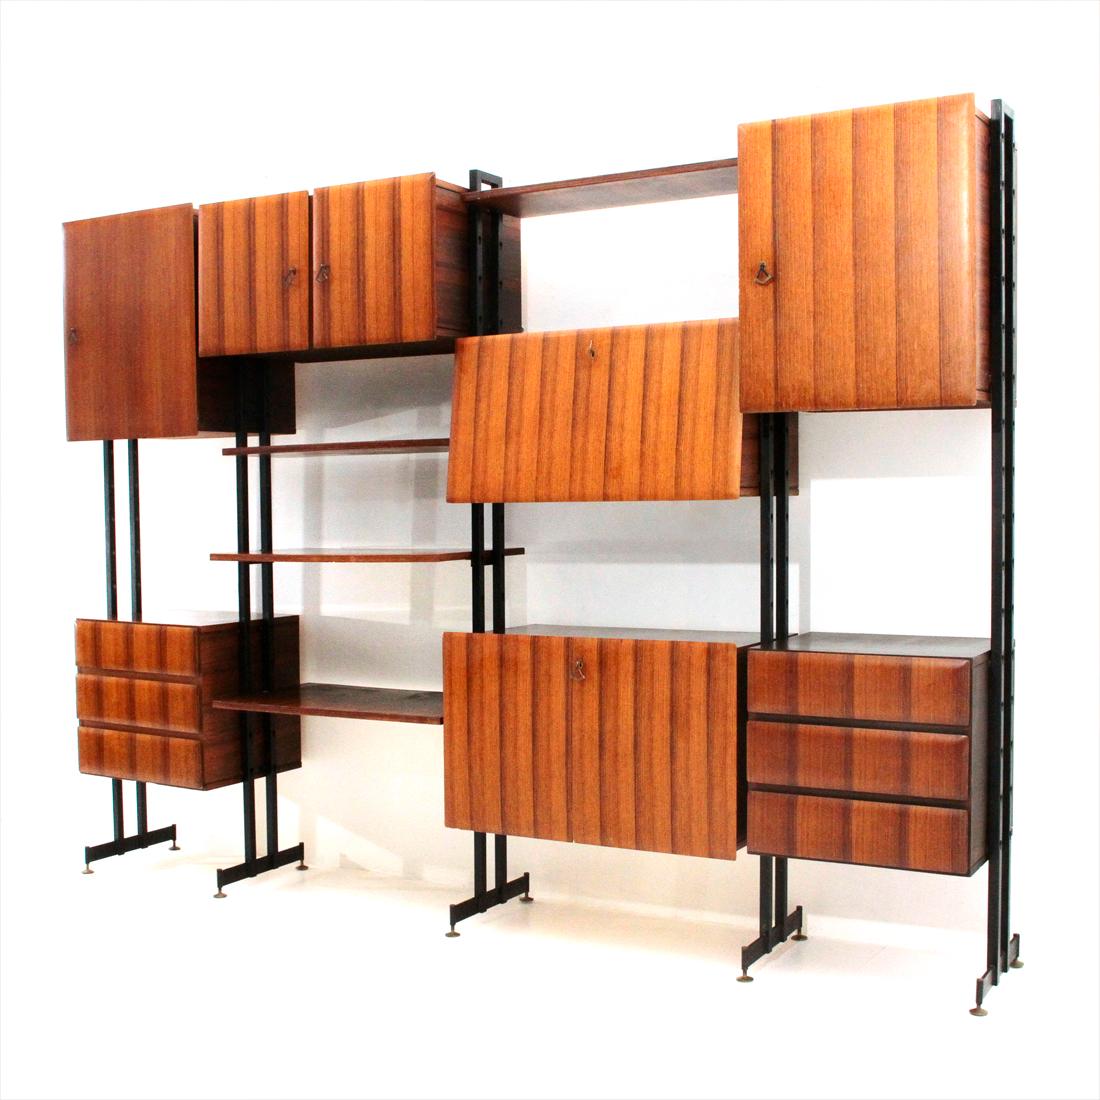 Italian manufacture library produced in the 1950s.
Uprights in black painted metal with brass feet adjustable in height.
Container modules in veneered wood.
Front panels and drawers with tapered edges.
Interior shelves in veneered wood.
Bar